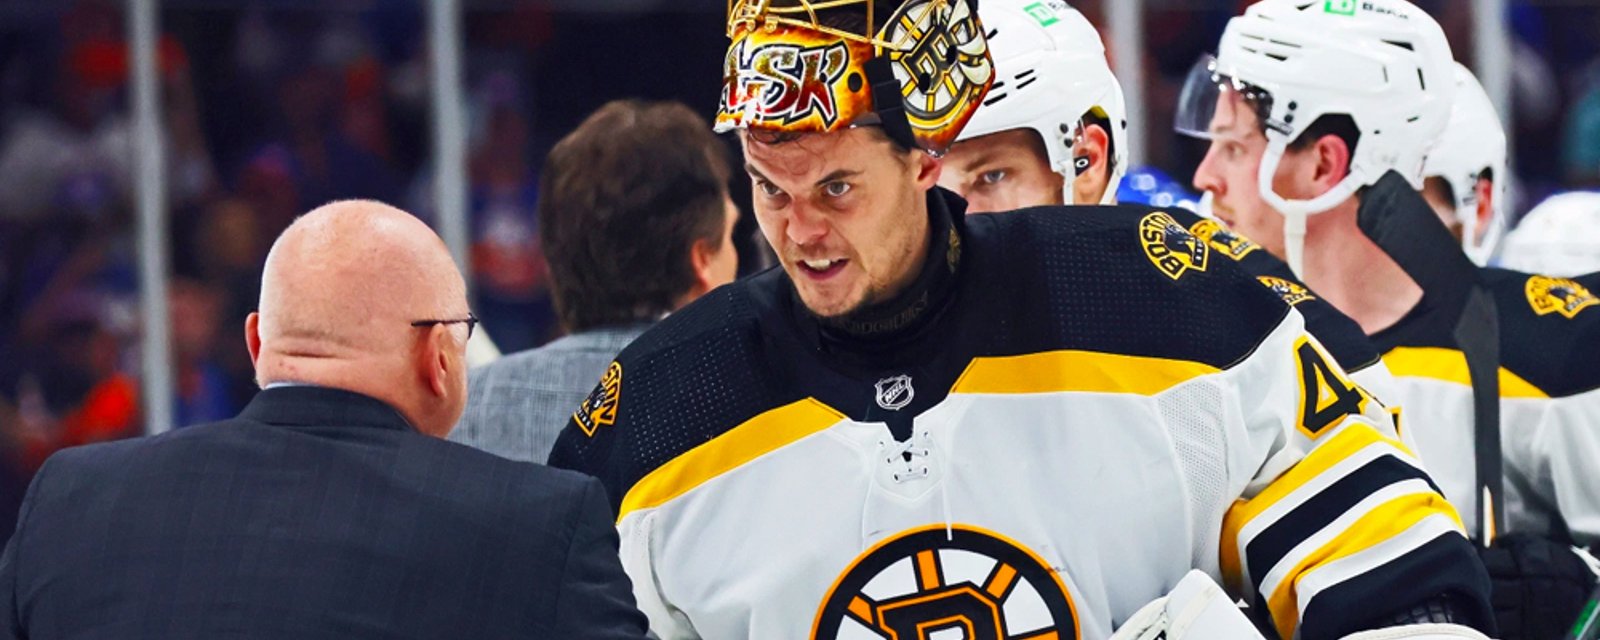 Rask speaks following Game 6, confirms he'll need surgery